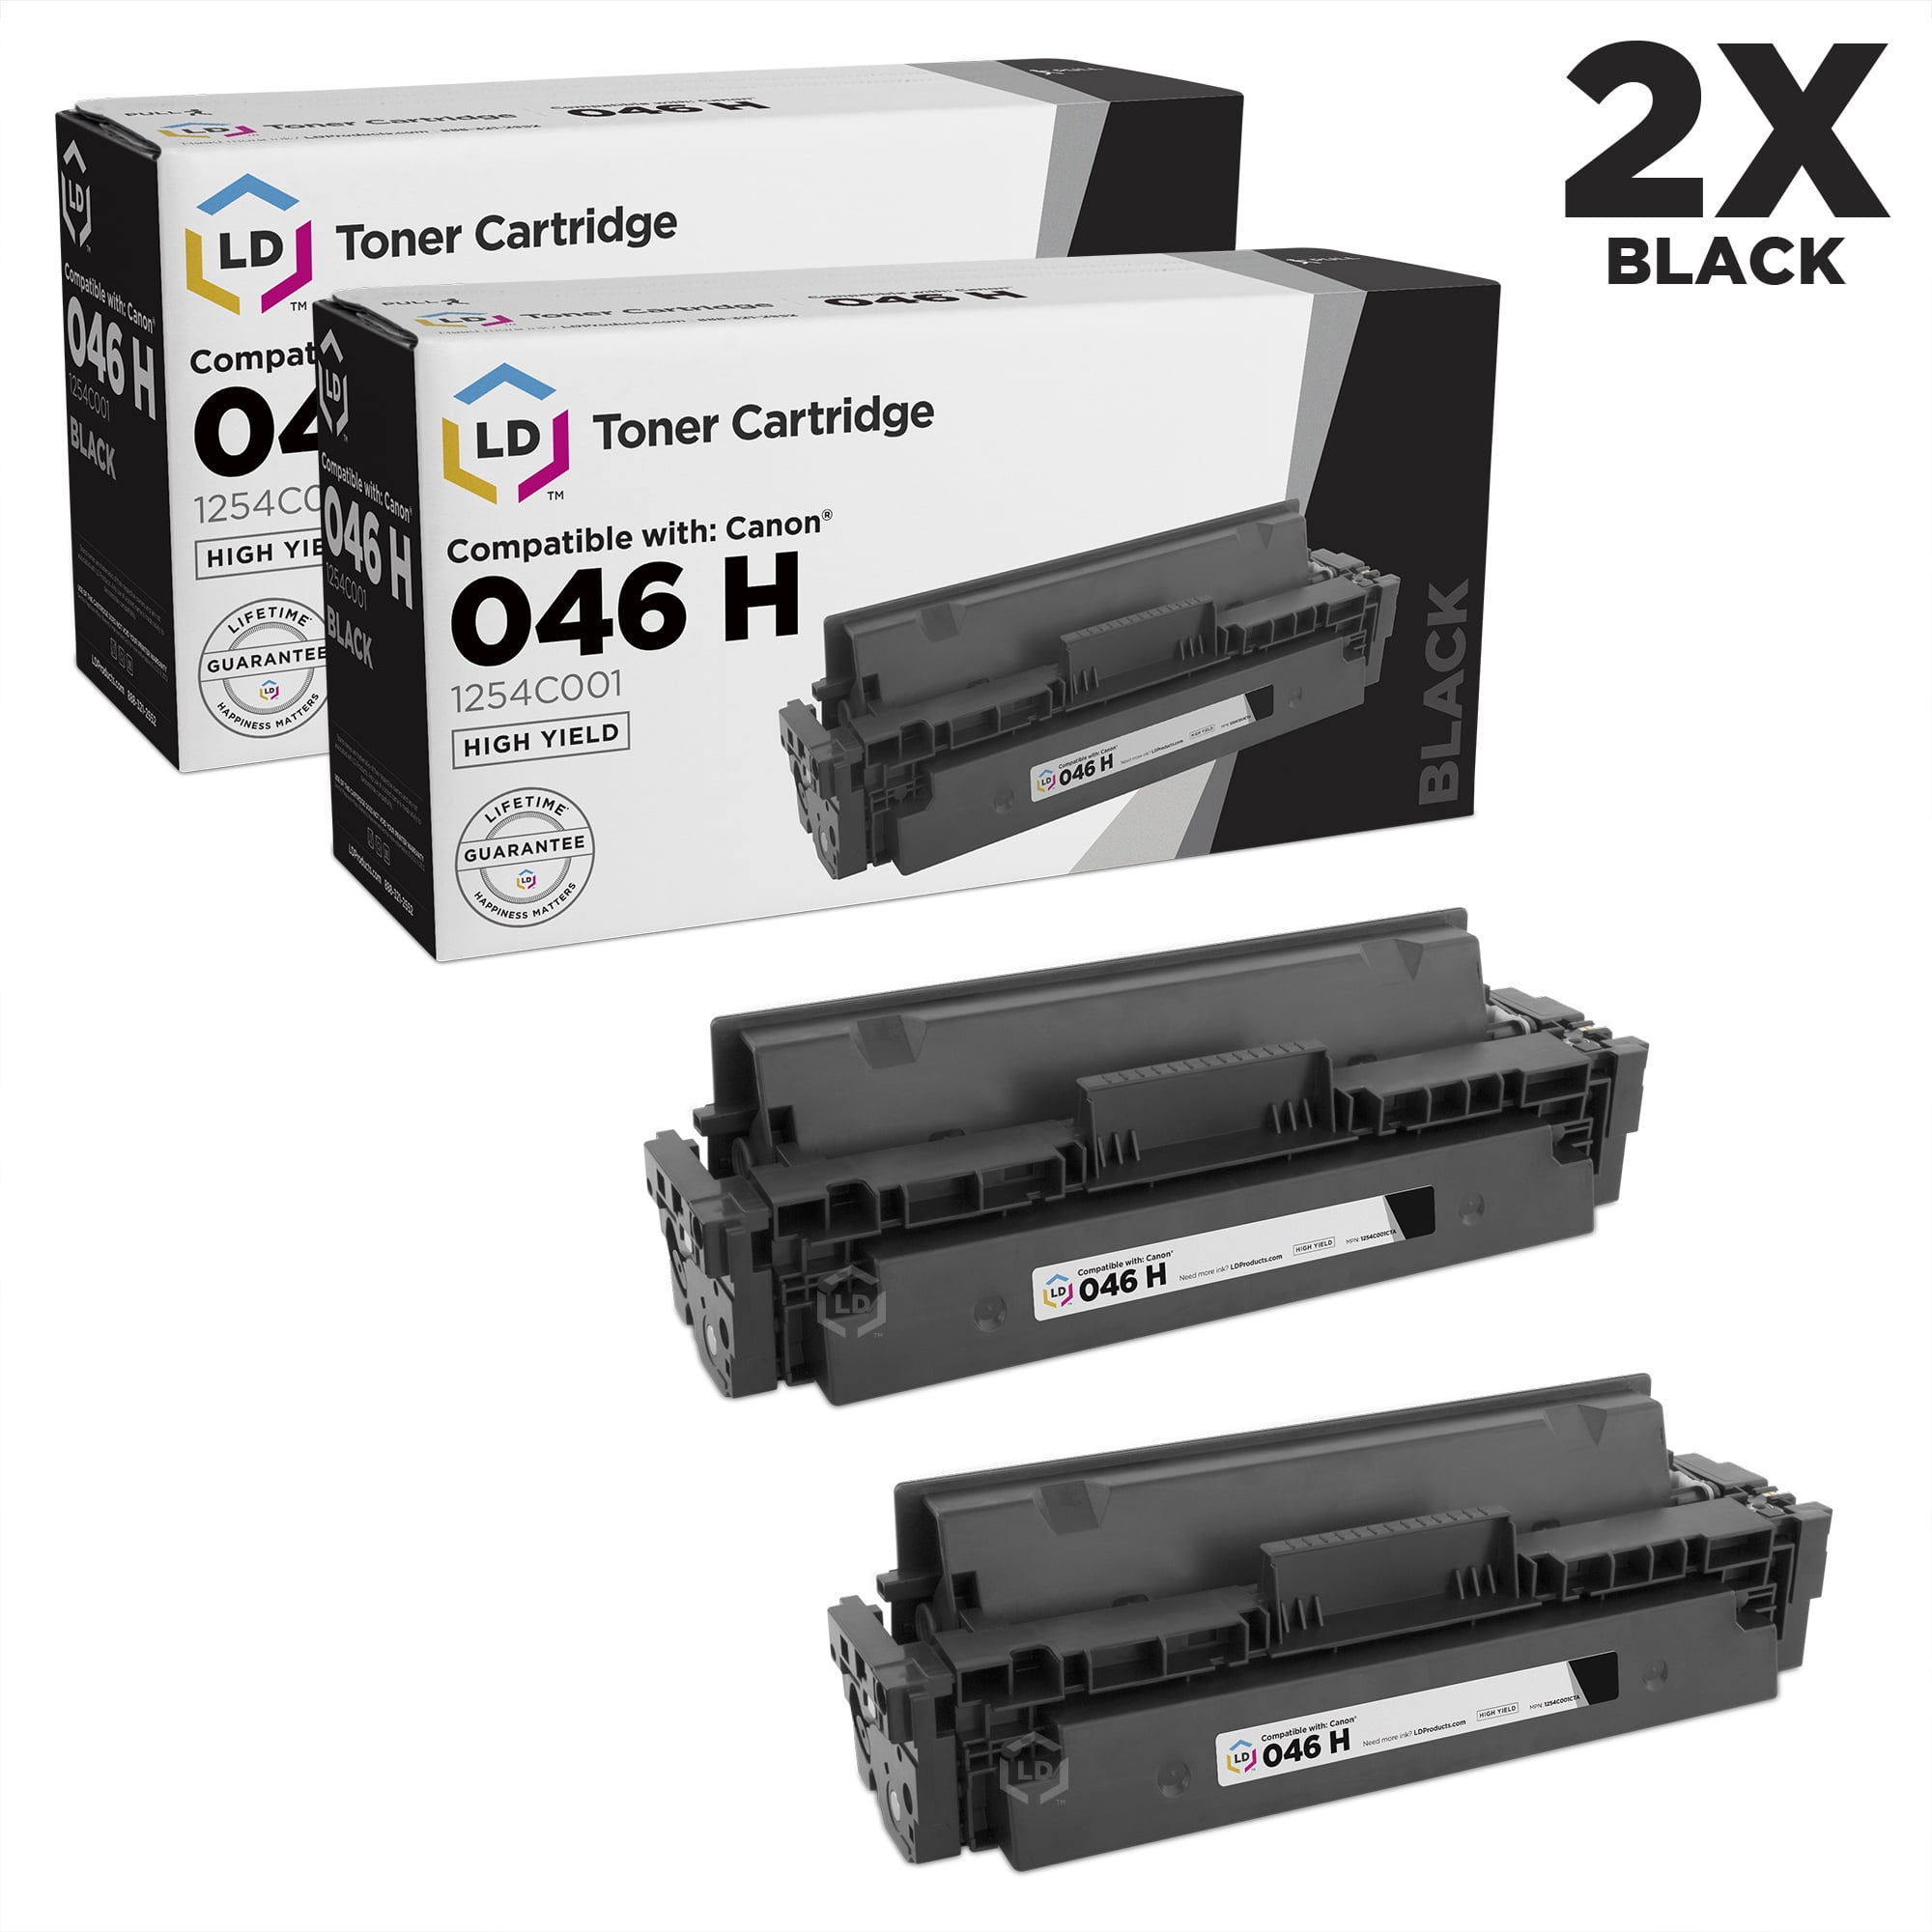 2C/2Y/2M 6-Pack 046H Compatible for Toner Cartridge Replacement for Canon Color Image Class LBP654Cdw MF735Cdw MF731Cdw MF733Cdw Printer Toner Cartridge. 